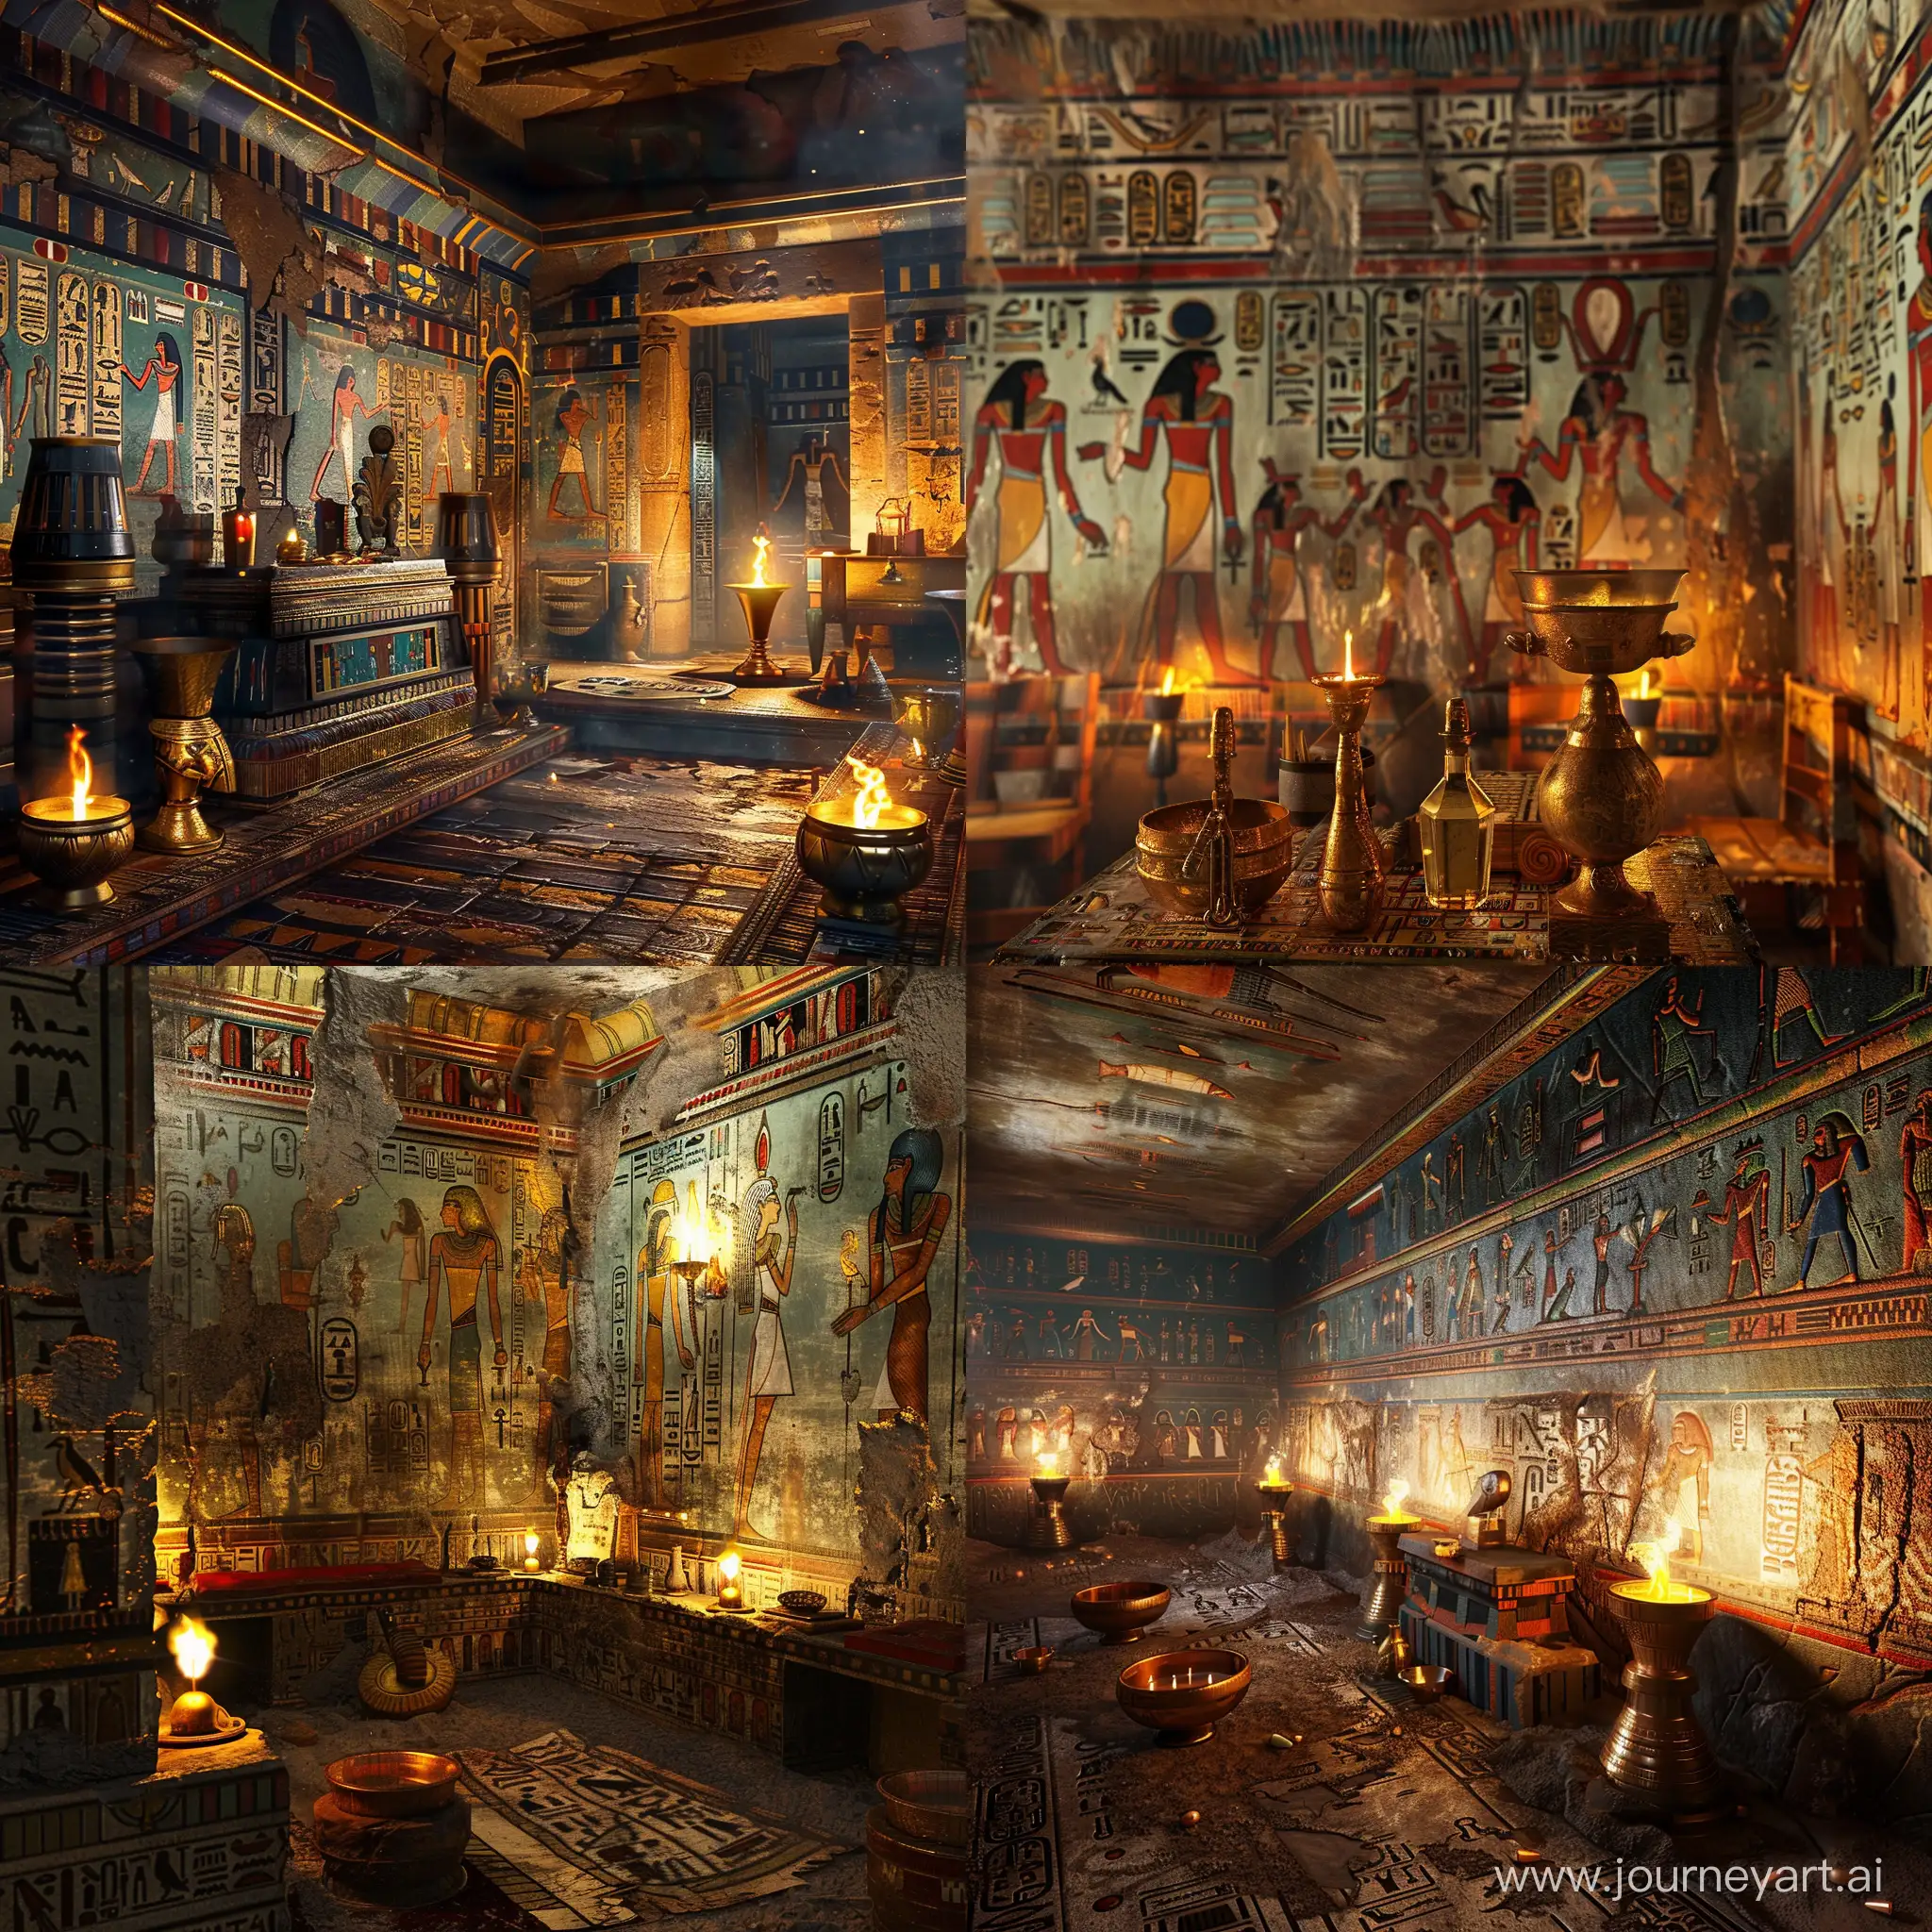 Ancient-Egyptian-Tomb-Interior-with-Painted-Walls-and-Golden-Ornaments